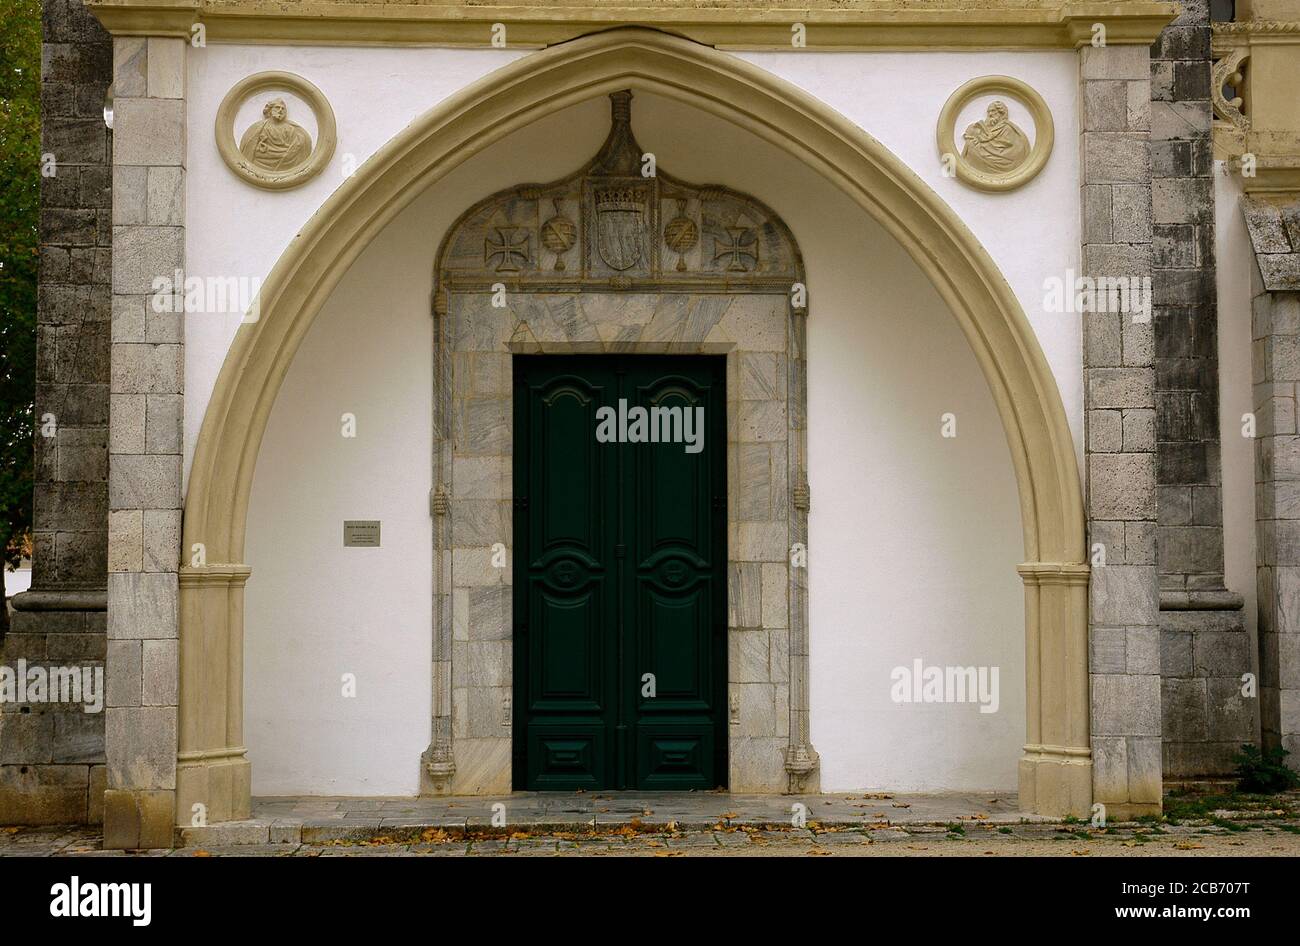 Portugal, Alentejo region, Beja. Convent of Our Lady of the Conception (Convento de Nossa Senhora da Conceiçao), a congregation of Poor Clares. It was founded in 1495. Today Museum Rainha Dona Leonor. Entrance door of porch with an ogee arch. Stock Photo